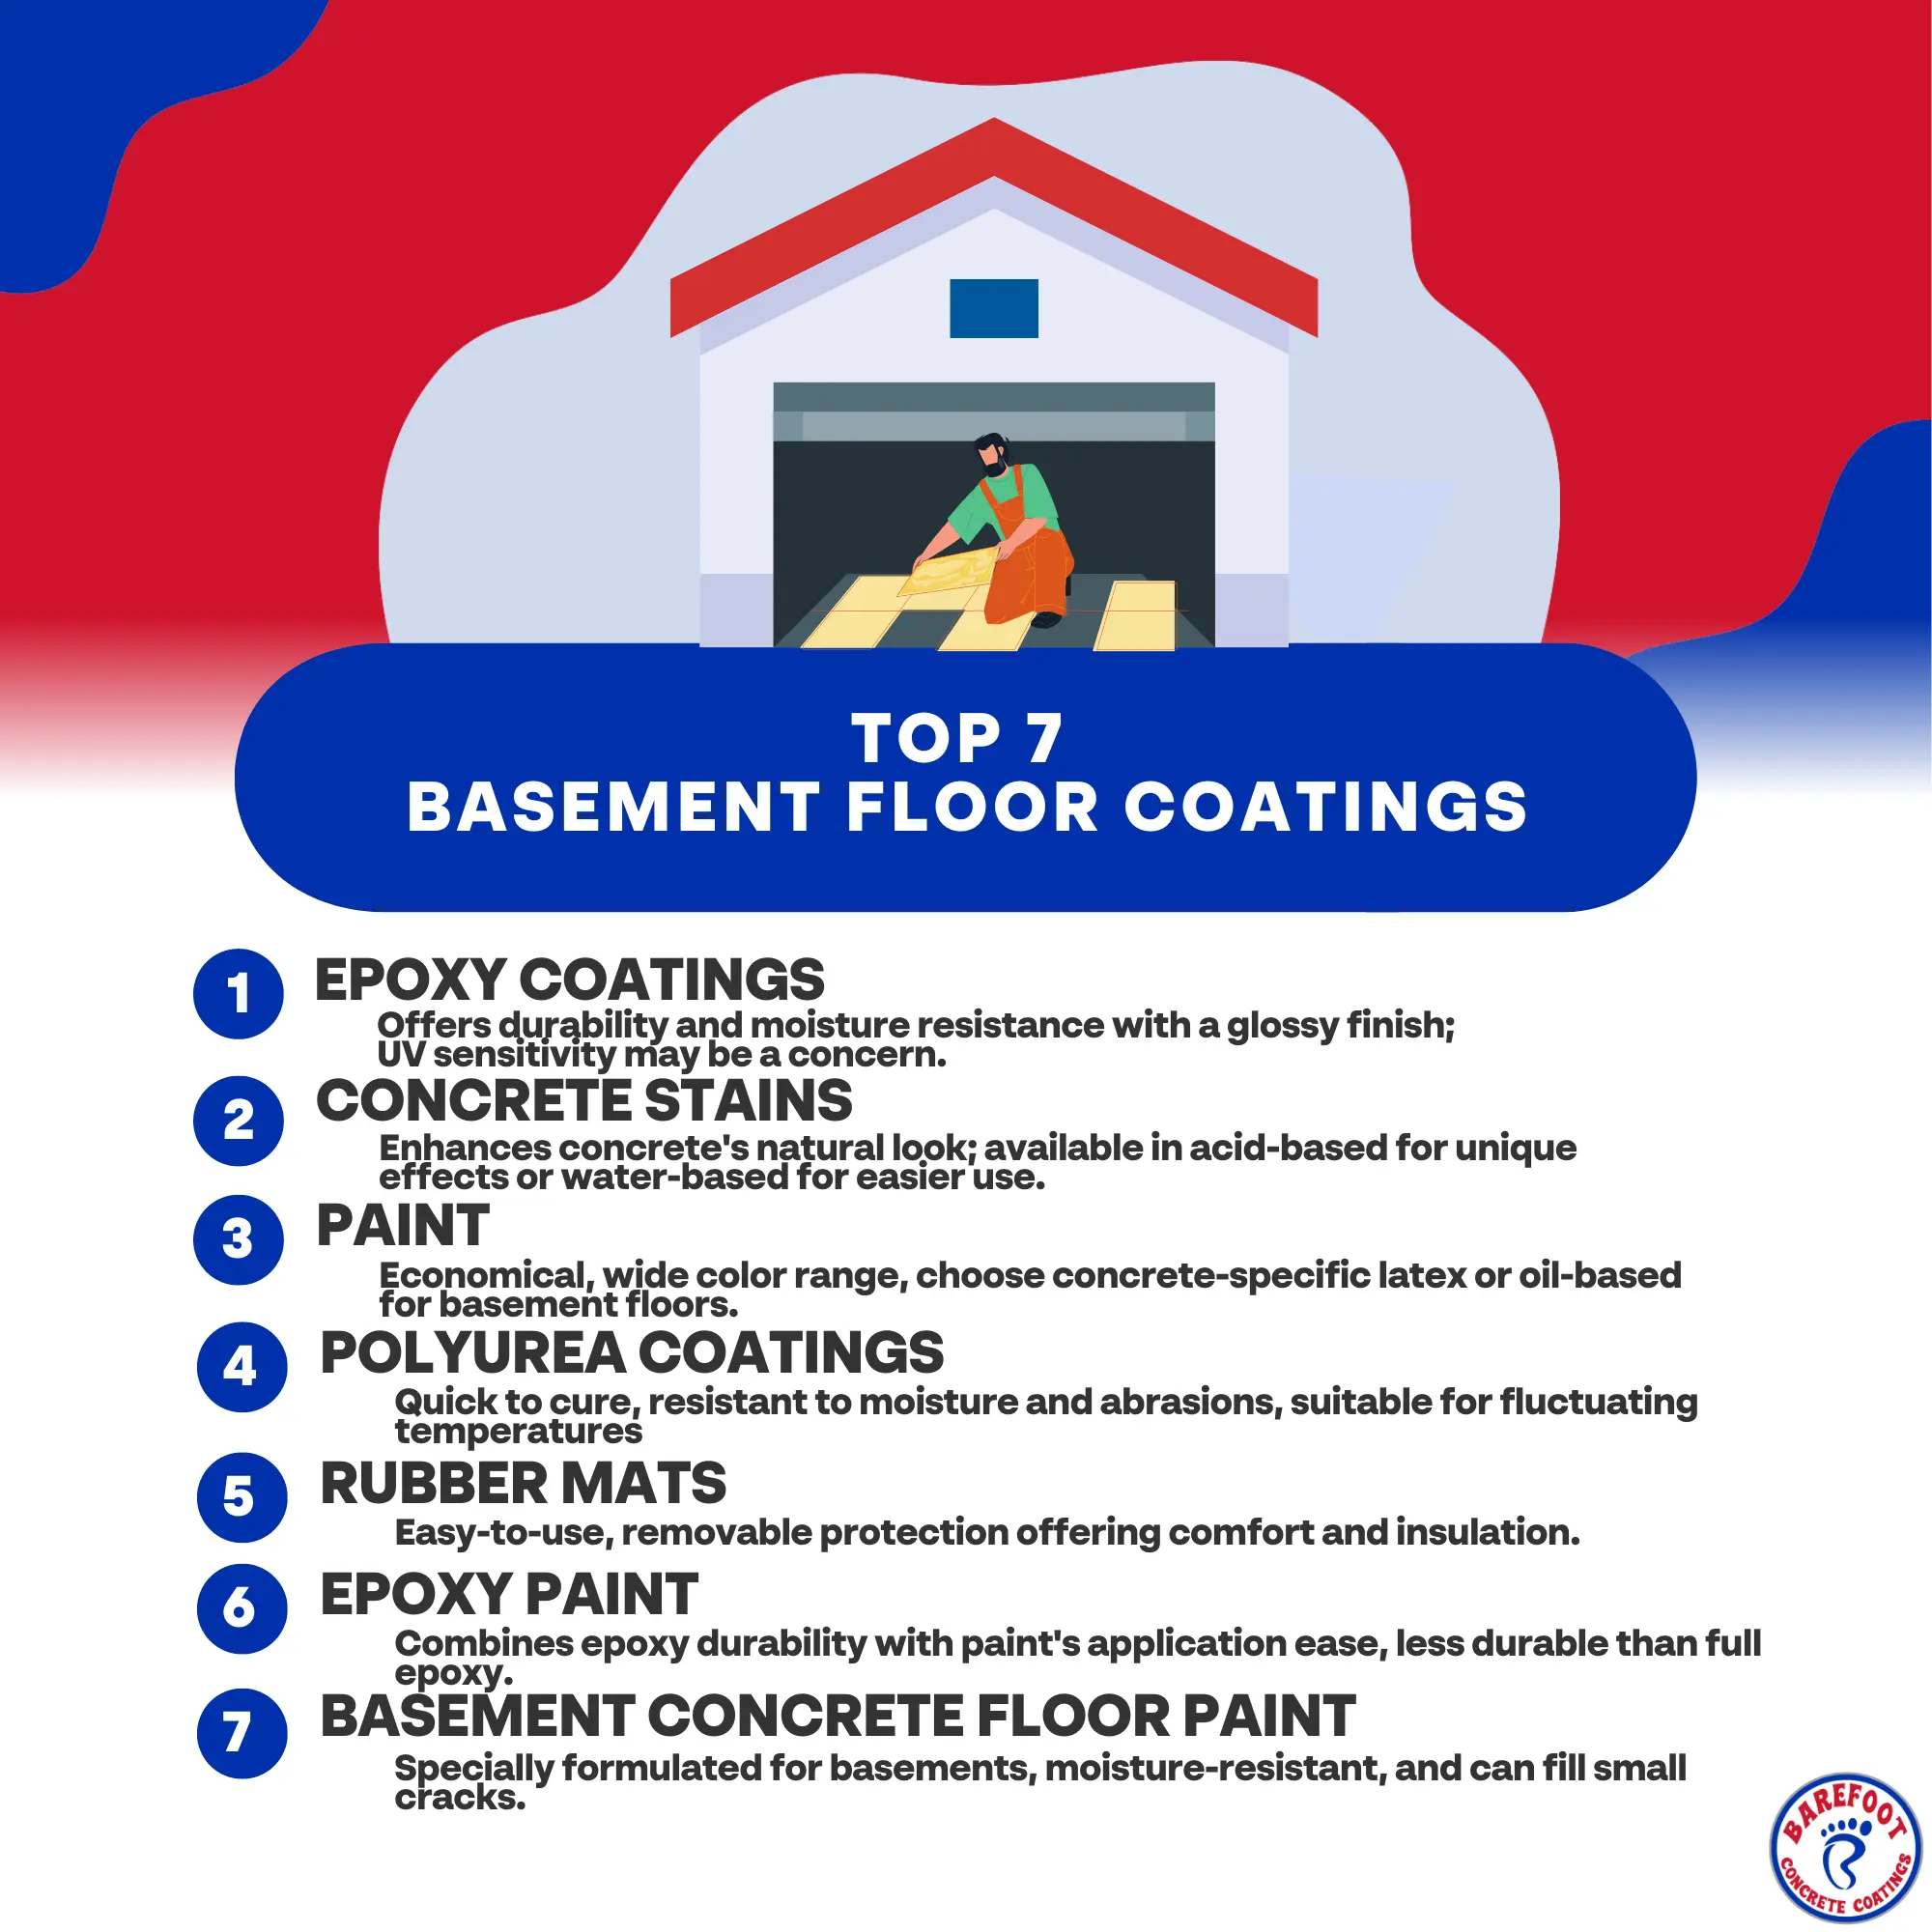 Top 7 Basement Floor Coatings: Which One is the Best? | BCC